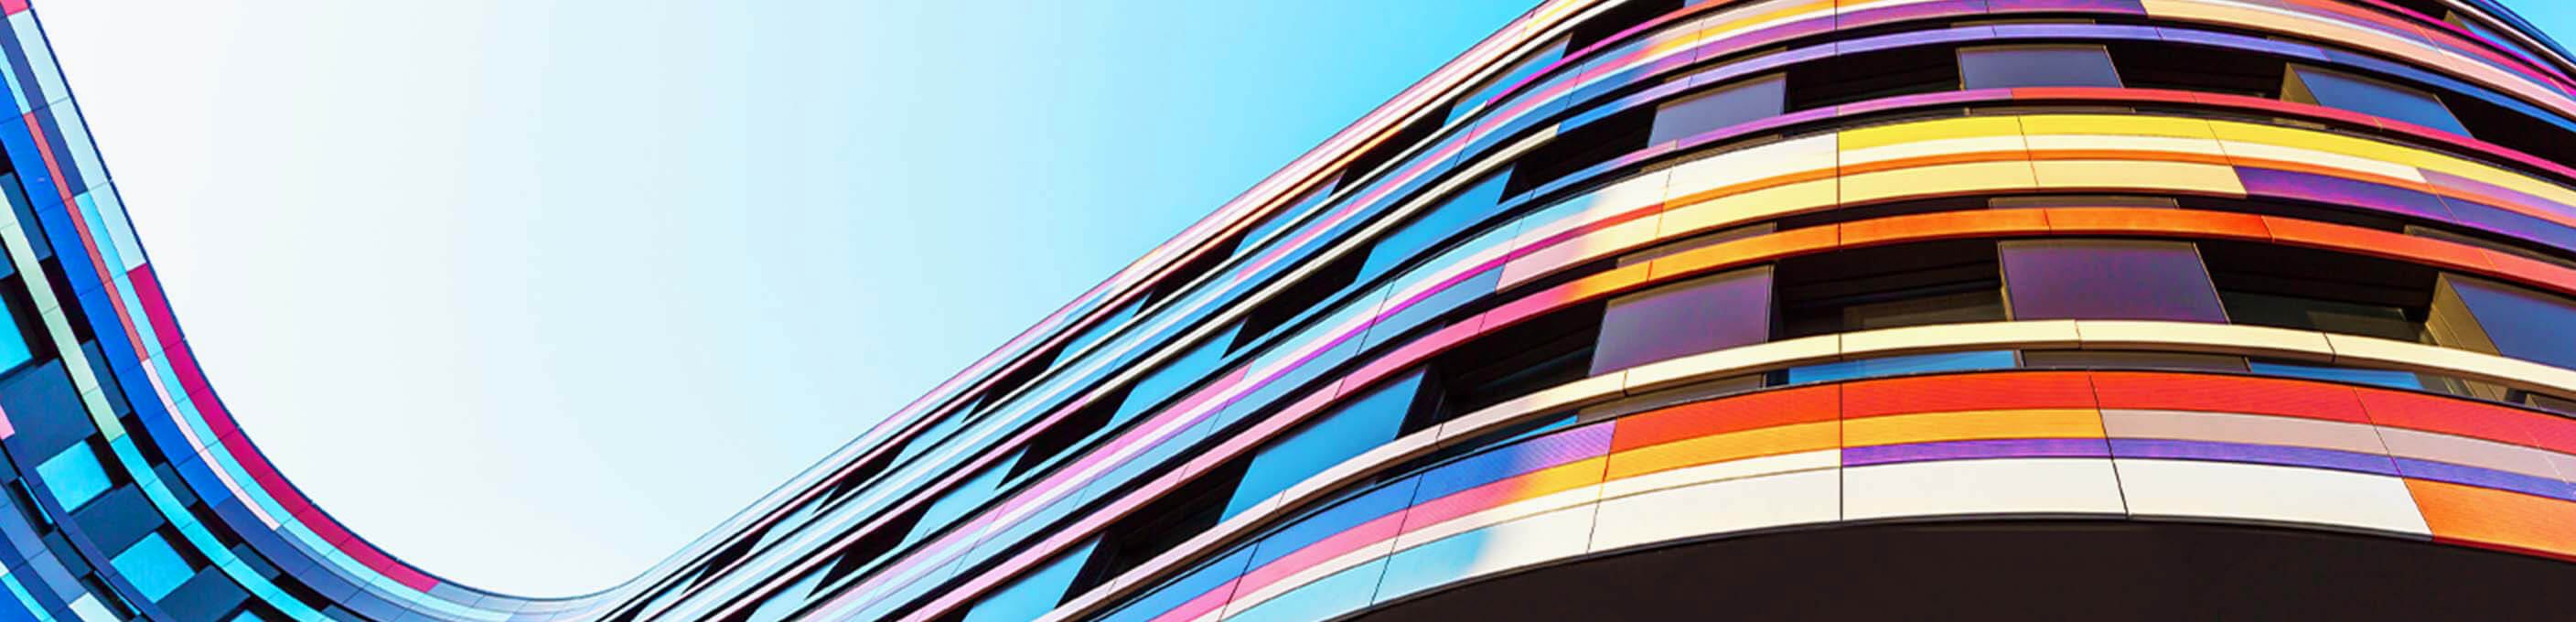 Abstract colorful buidling against sky